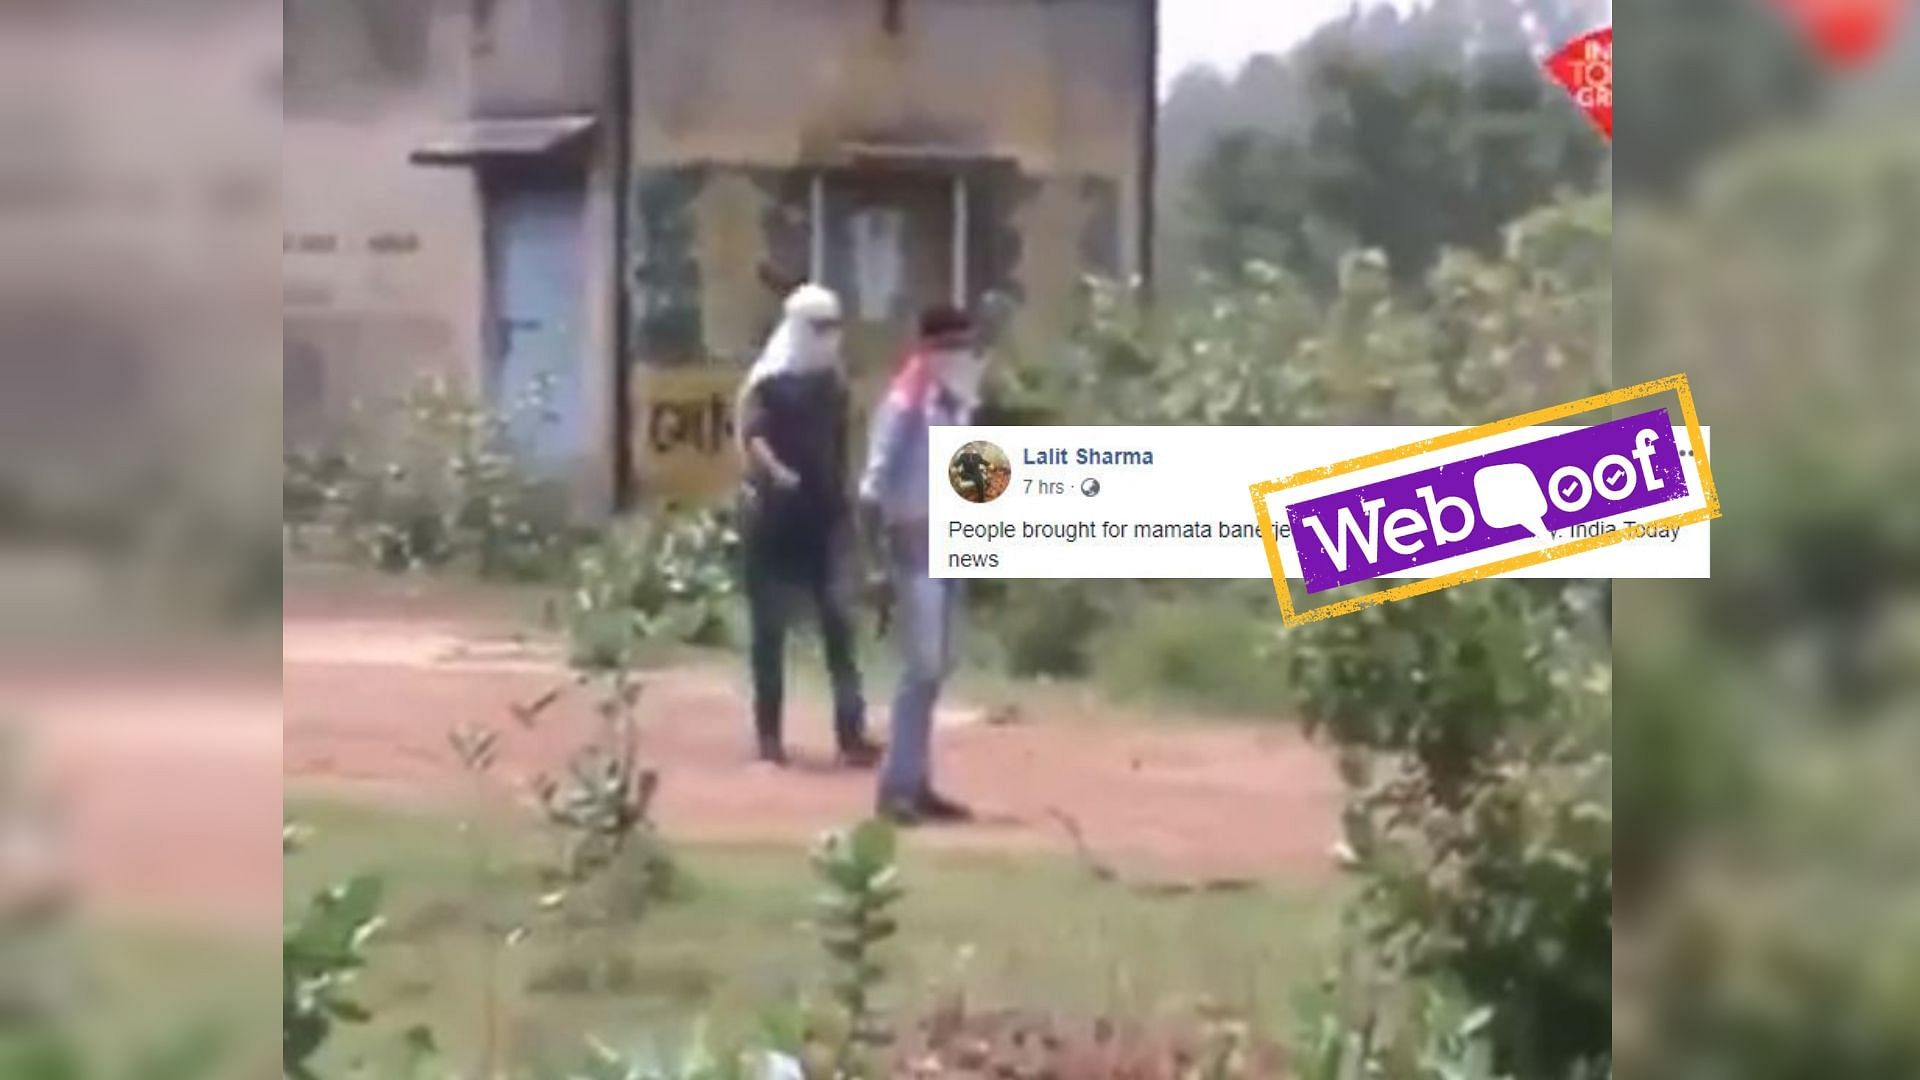 A video started circulating on social media claiming that TMC workers brandished guns to threaten people into attending the rally.